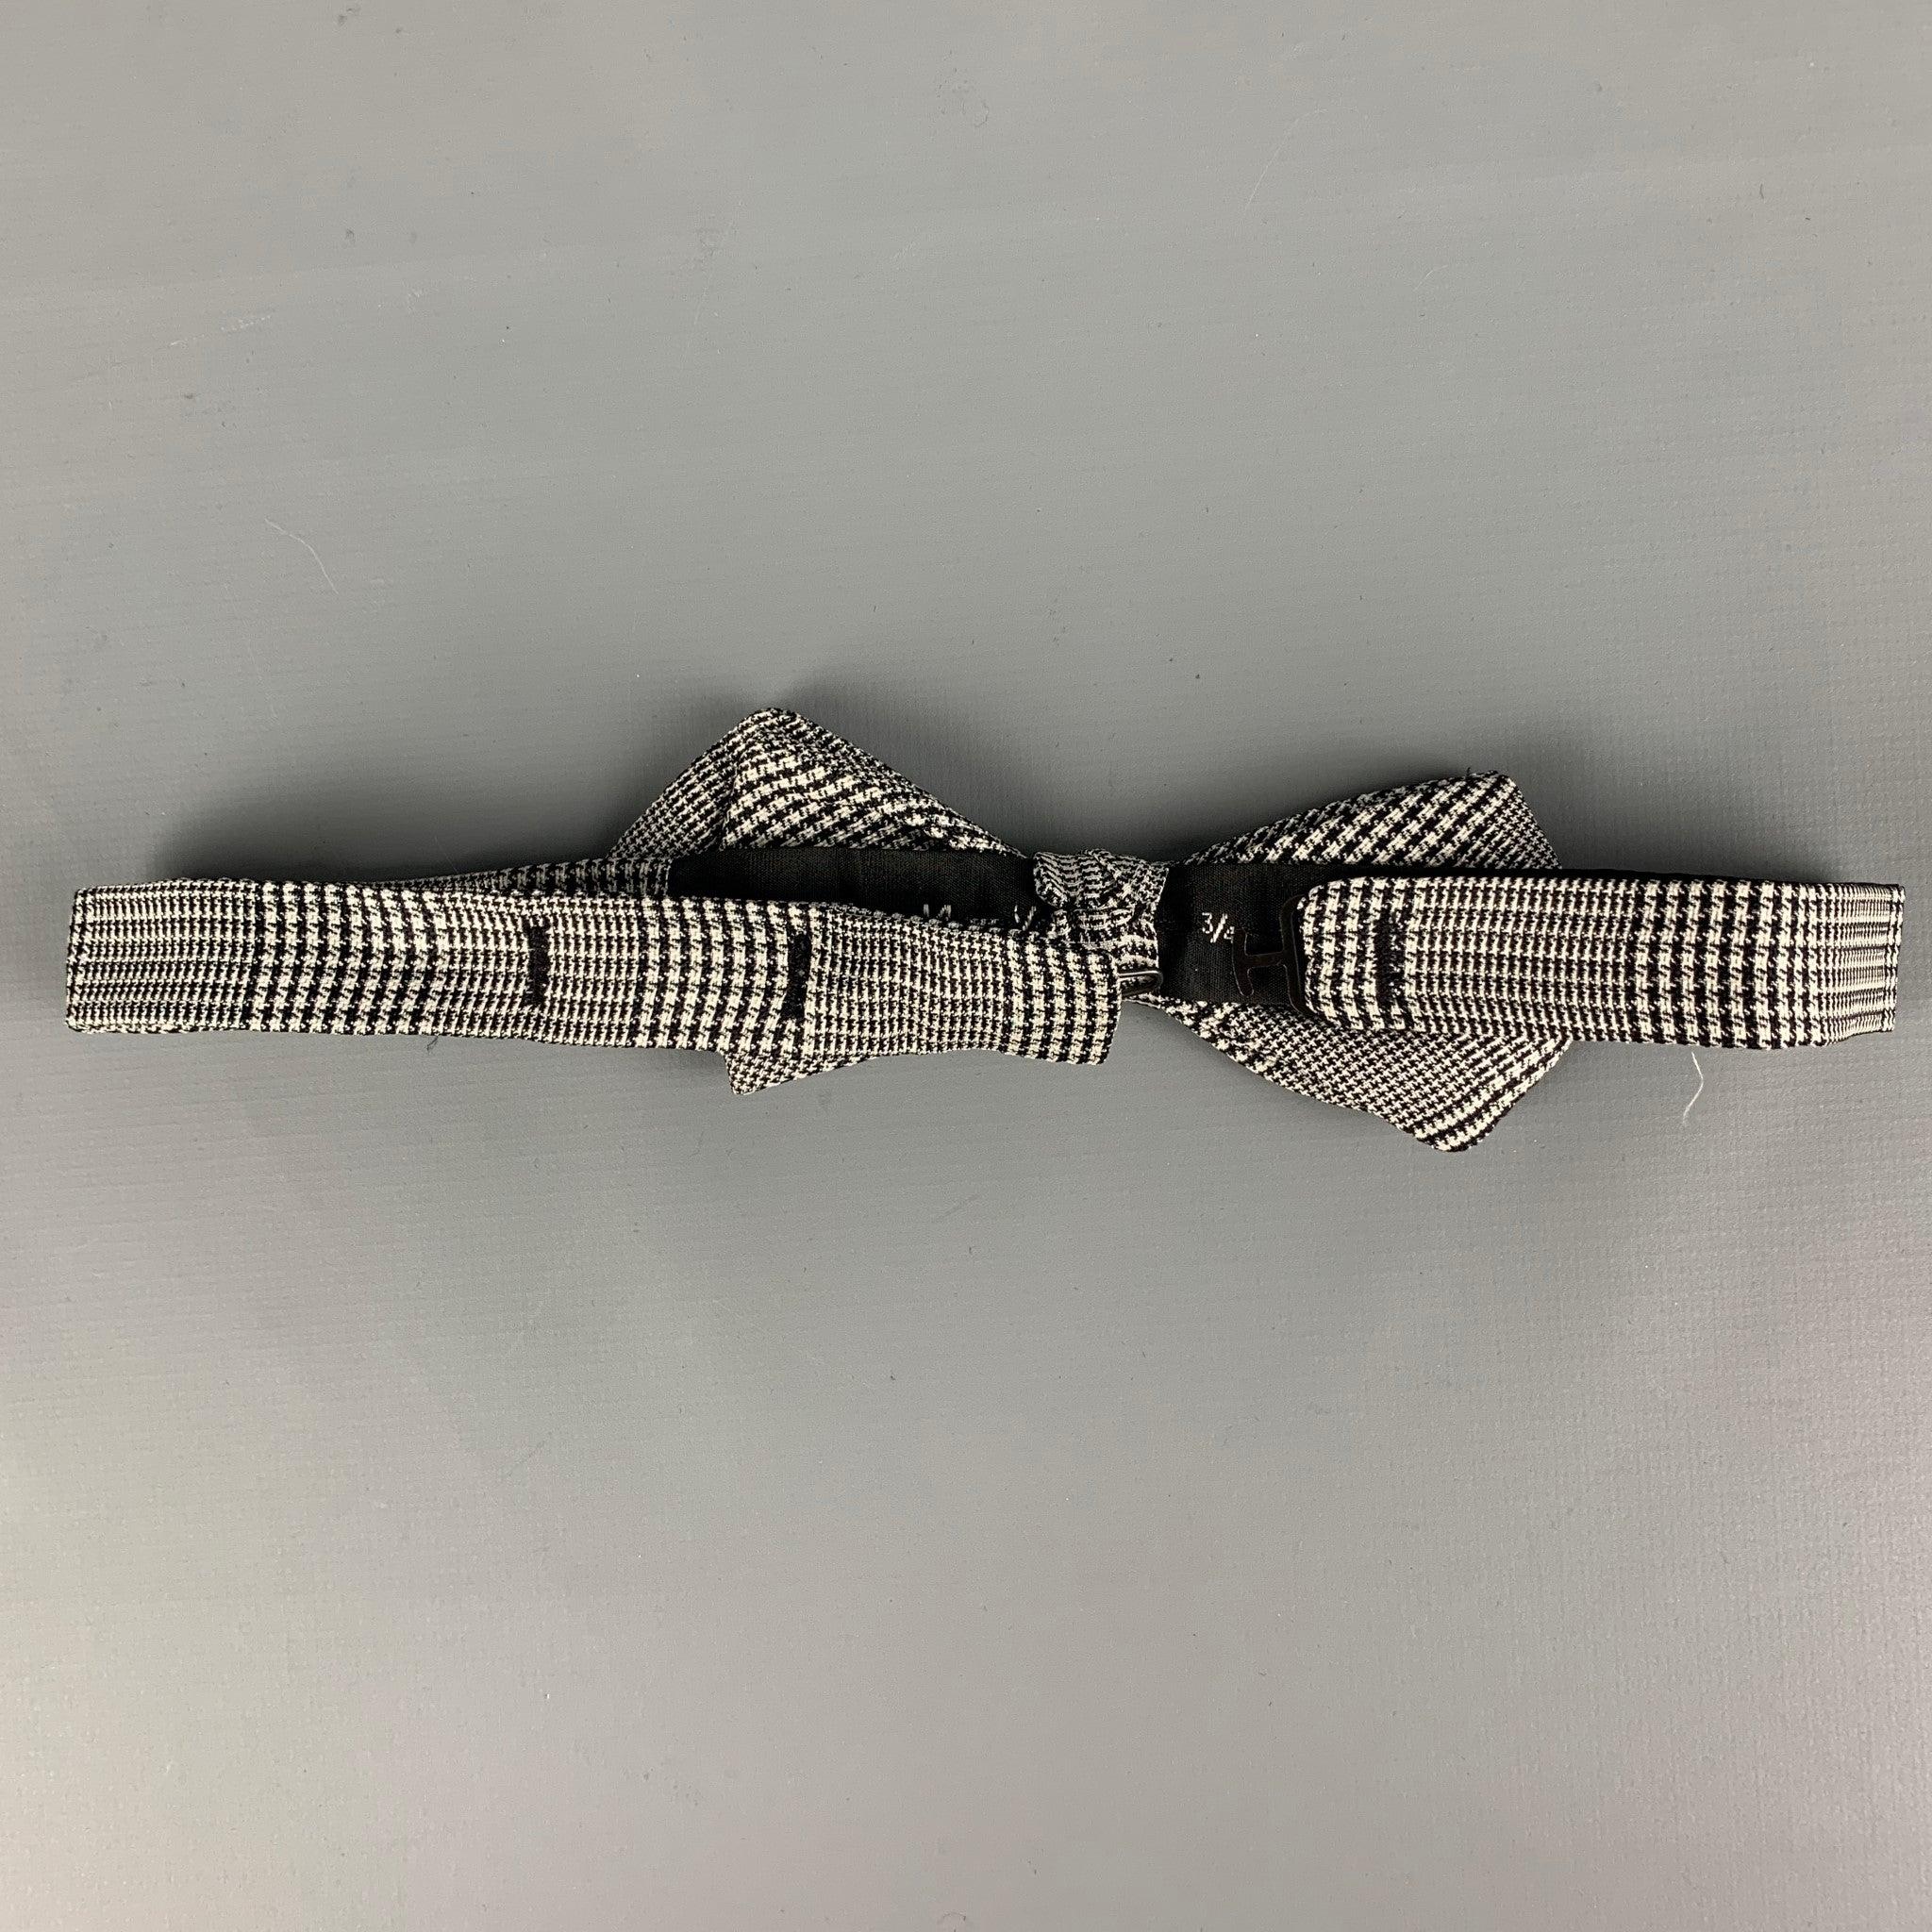 VALENTINO bow tie comes in a black & white houndstooth silk featuring a adjustable fit.
Very Good Pre-Owned Condition.
Height: 2.5 inches 
  
  
 
Reference: 118694
Category: Bow Tie
More Details
    
Brand:  VALENTINO
Color:  Black
Color 2: 